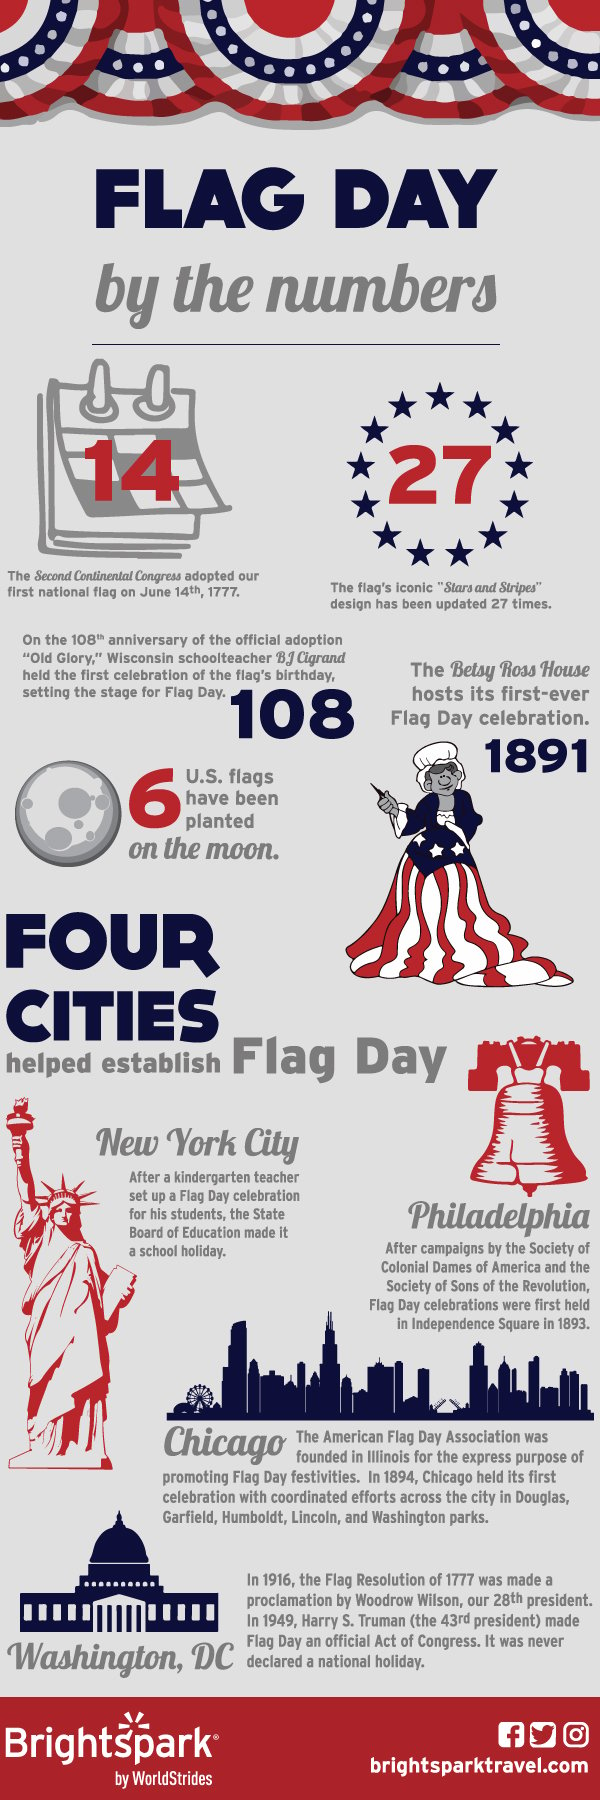 flag-day-by-the-numbers-9-facts-to-celebrate-old-glory